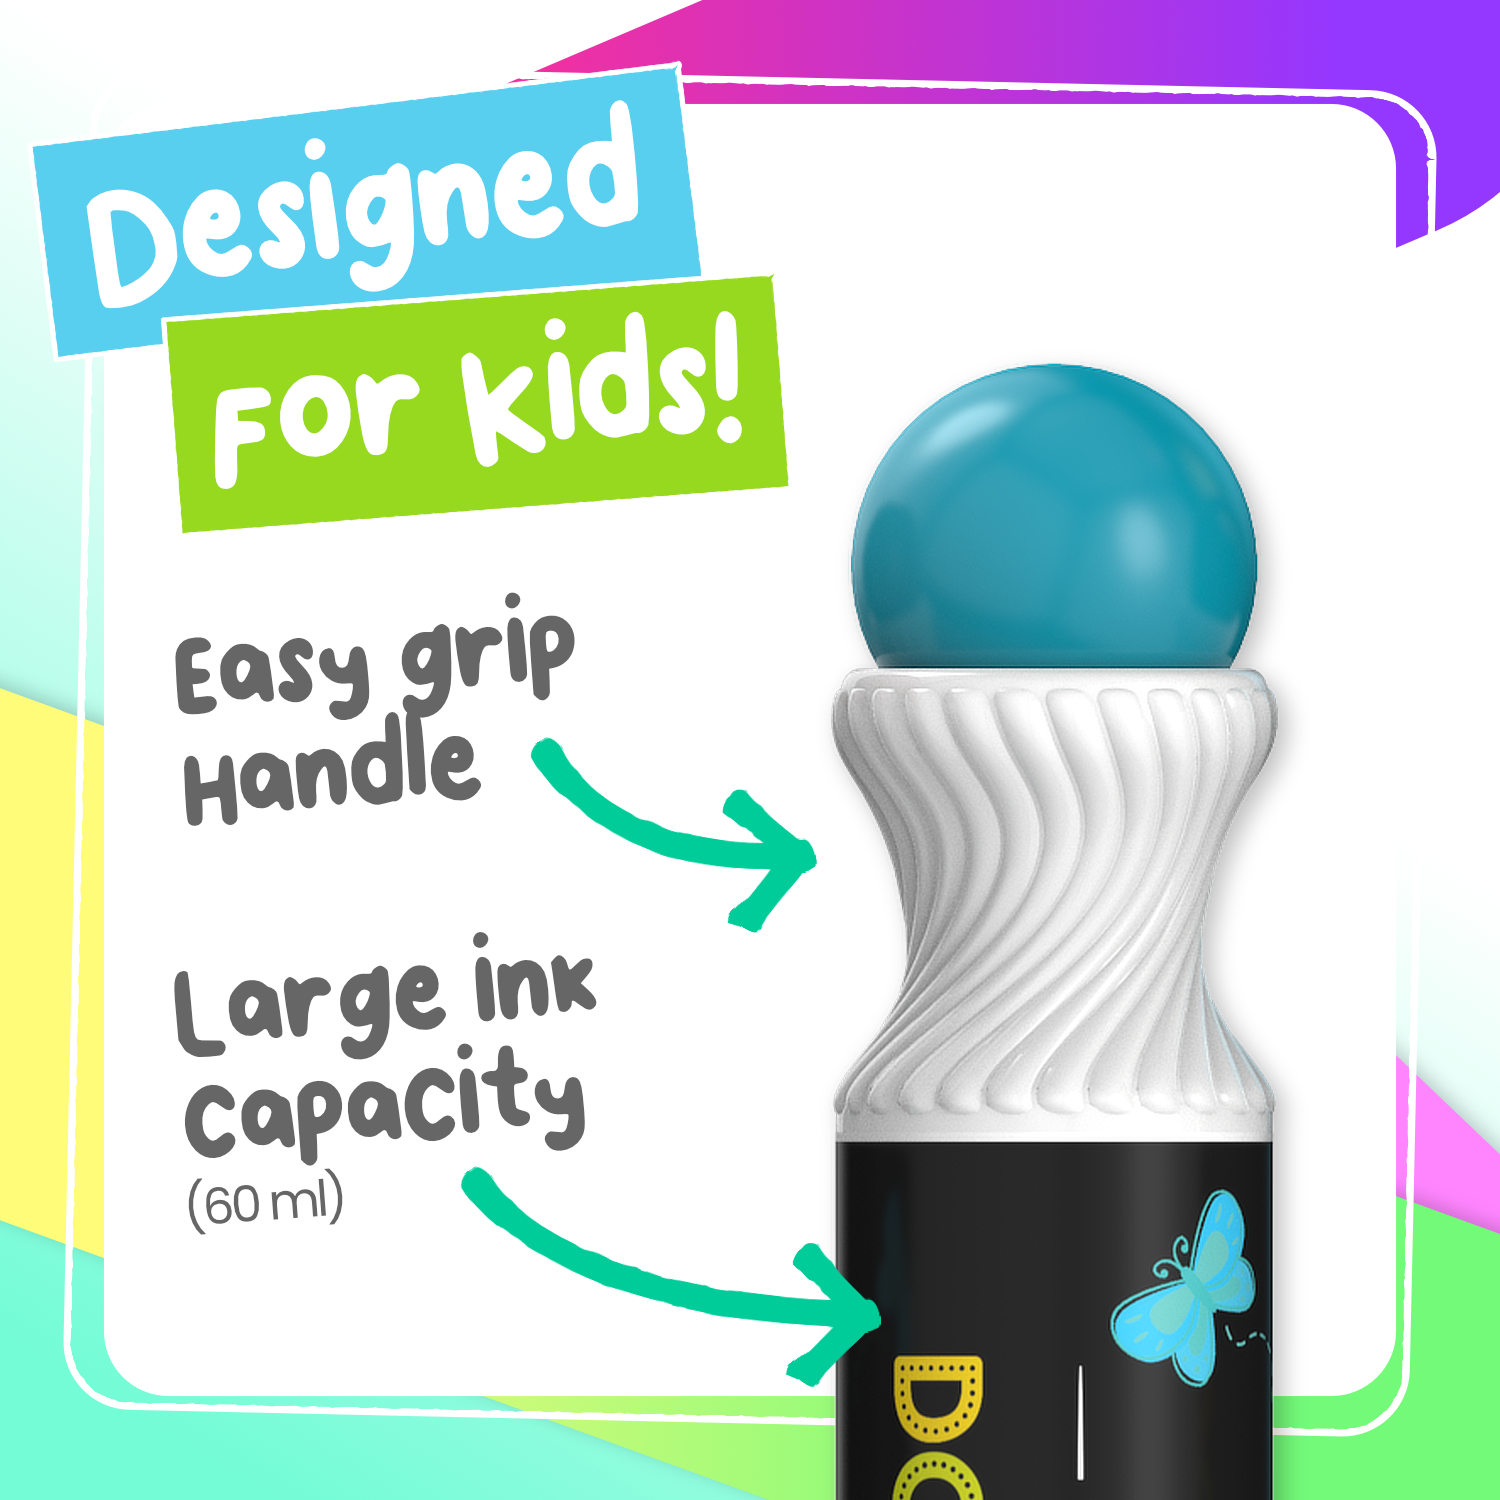 REASONABLES on Instagram: Washable Dot Marker Bottle Pens for Kids  Quantity: 3 Markers each with 60ml Ink SKILL DEVELOPMENT AND EDUCATIONAL  TOOL - Use the educational activities included to develop fine motor